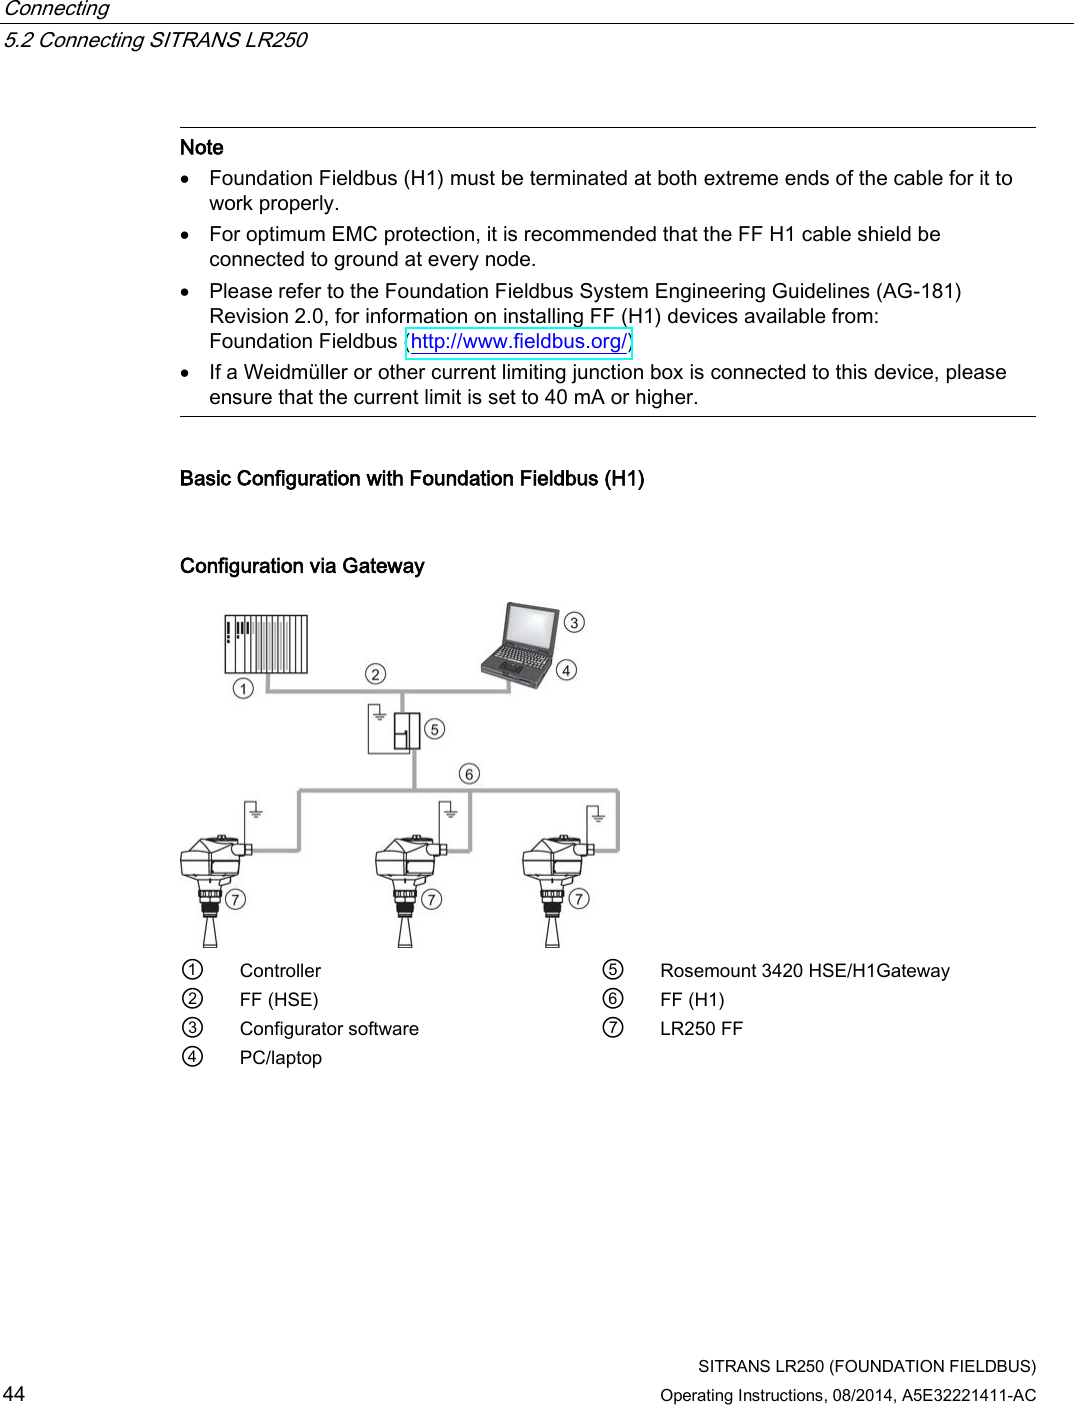 Connecting   5.2 Connecting SITRANS LR250  SITRANS LR250 (FOUNDATION FIELDBUS) 44 Operating Instructions, 08/2014, A5E32221411-AC   Note • Foundation Fieldbus (H1) must be terminated at both extreme ends of the cable for it to work properly. • For optimum EMC protection, it is recommended that the FF H1 cable shield be connected to ground at every node. • Please refer to the Foundation Fieldbus System Engineering Guidelines (AG-181) Revision 2.0, for information on installing FF (H1) devices available from:  Foundation Fieldbus (http://www.fieldbus.org/) • If a Weidmüller or other current limiting junction box is connected to this device, please ensure that the current limit is set to 40 mA or higher.  Basic Configuration with Foundation Fieldbus (H1)  Configuration via Gateway  ① Controller ⑤ Rosemount 3420 HSE/H1Gateway ② FF (HSE) ⑥ FF (H1) ③ Configurator software ⑦ LR250 FF ④ PC/laptop   